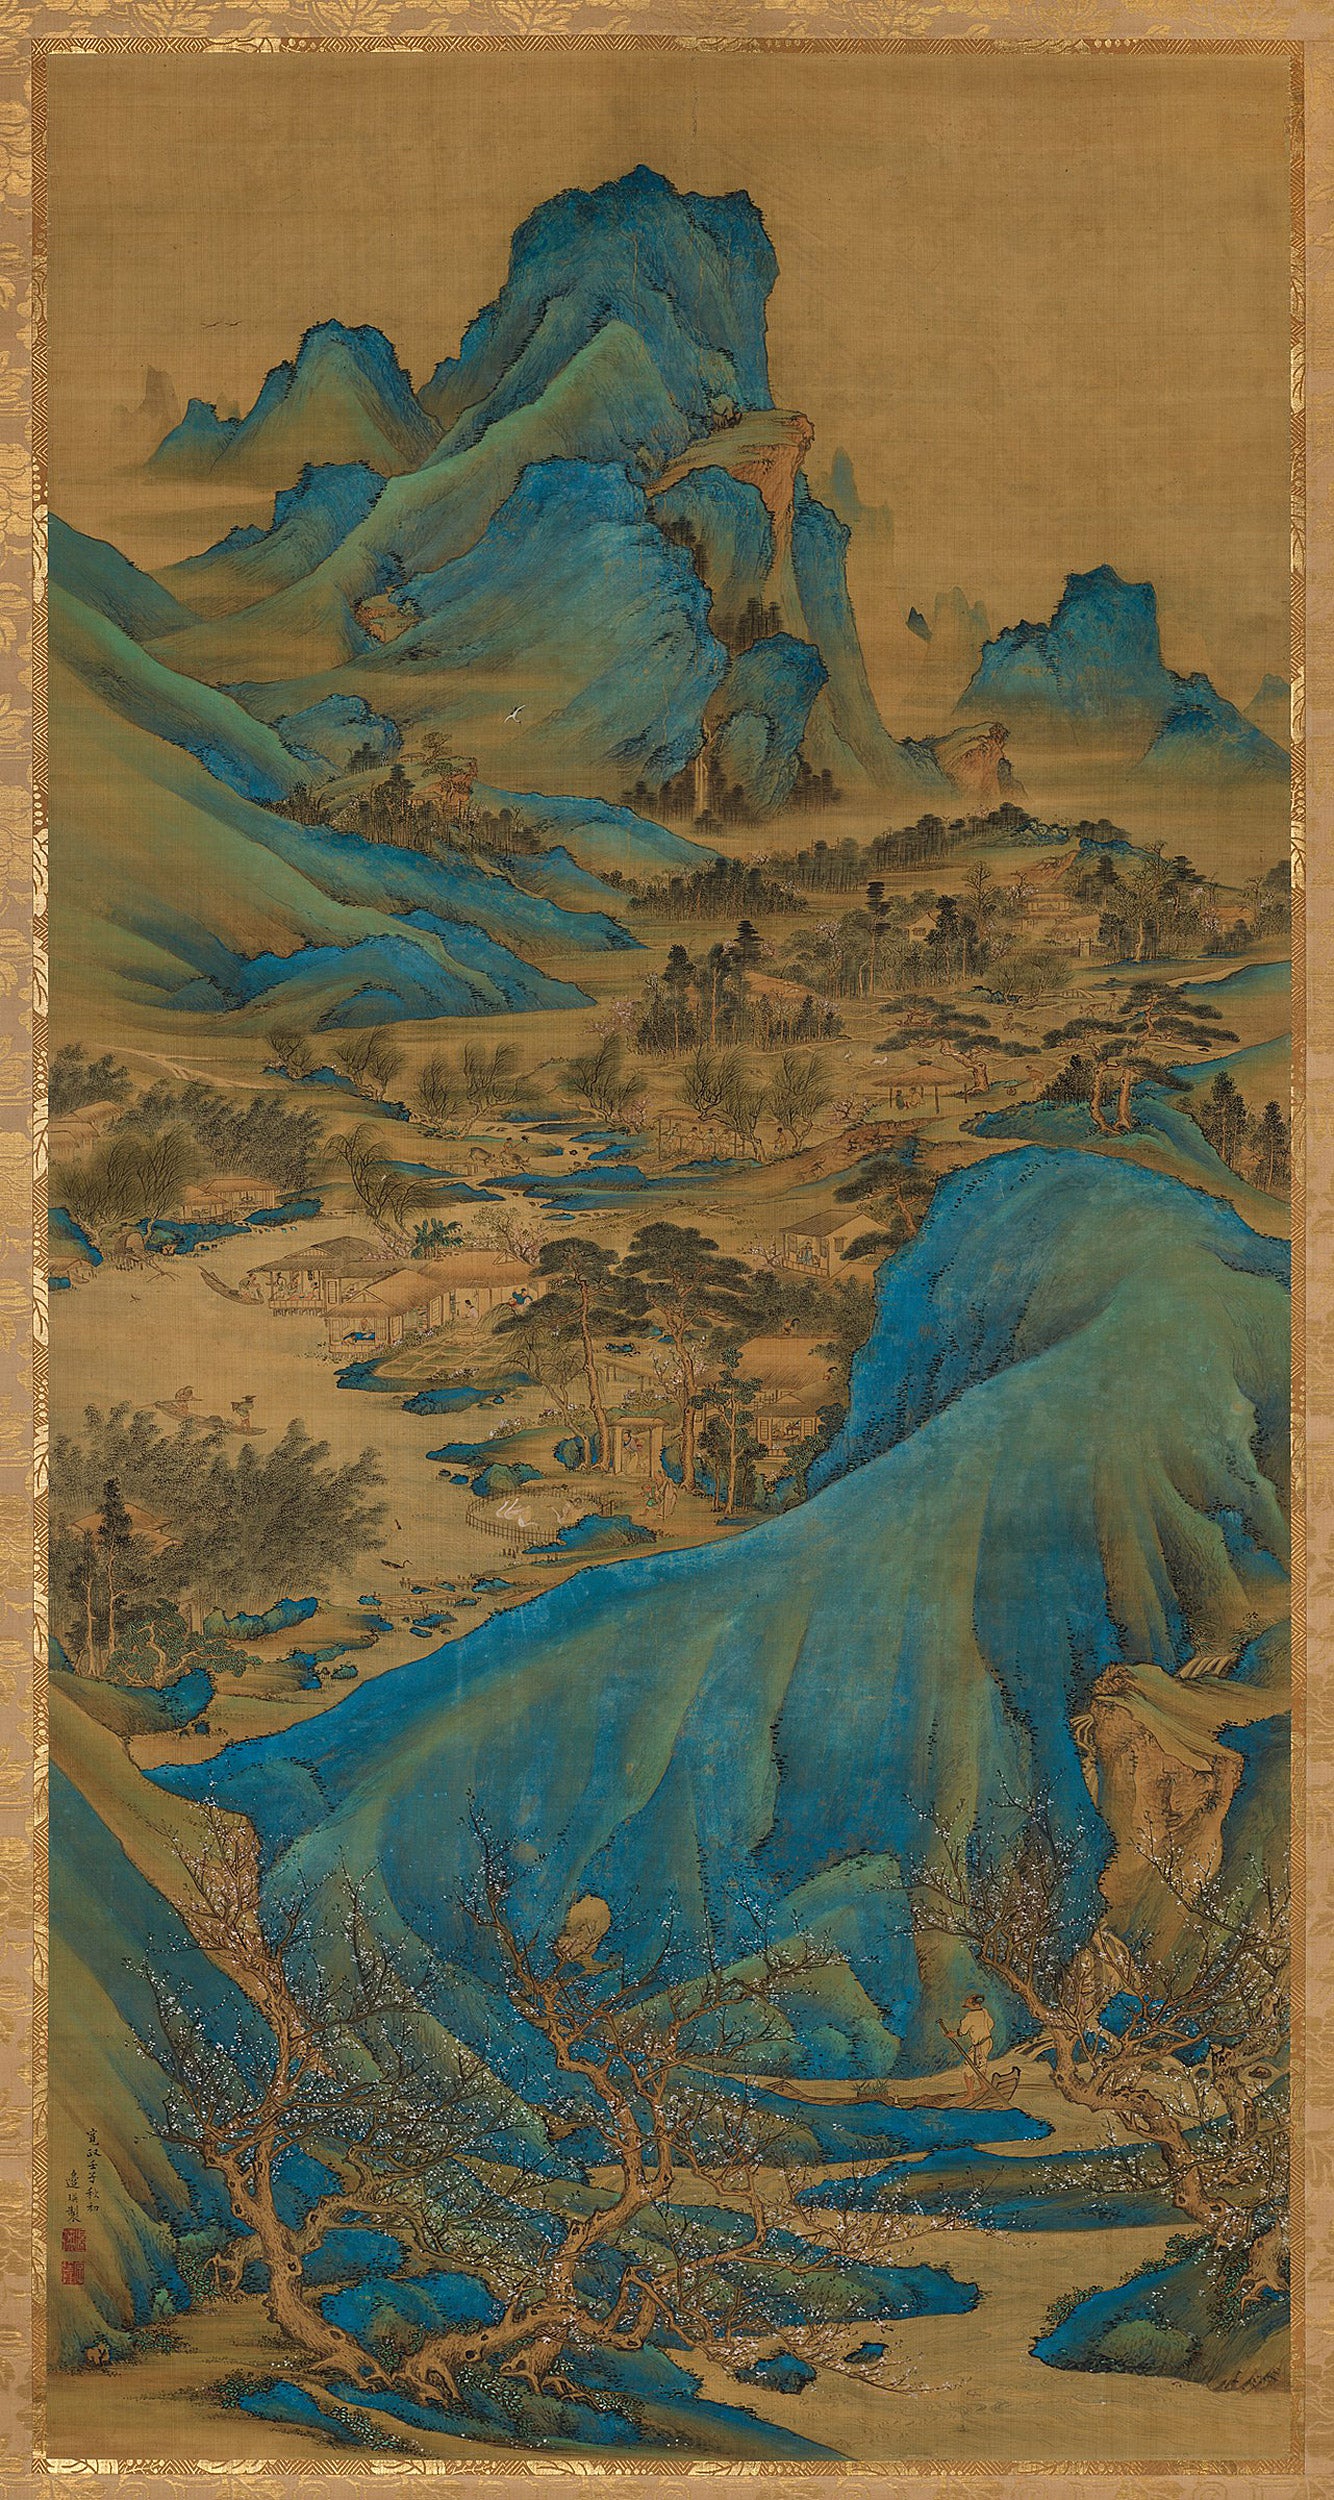 Scroll depicts river winding through a valley with dramatic blue hills.